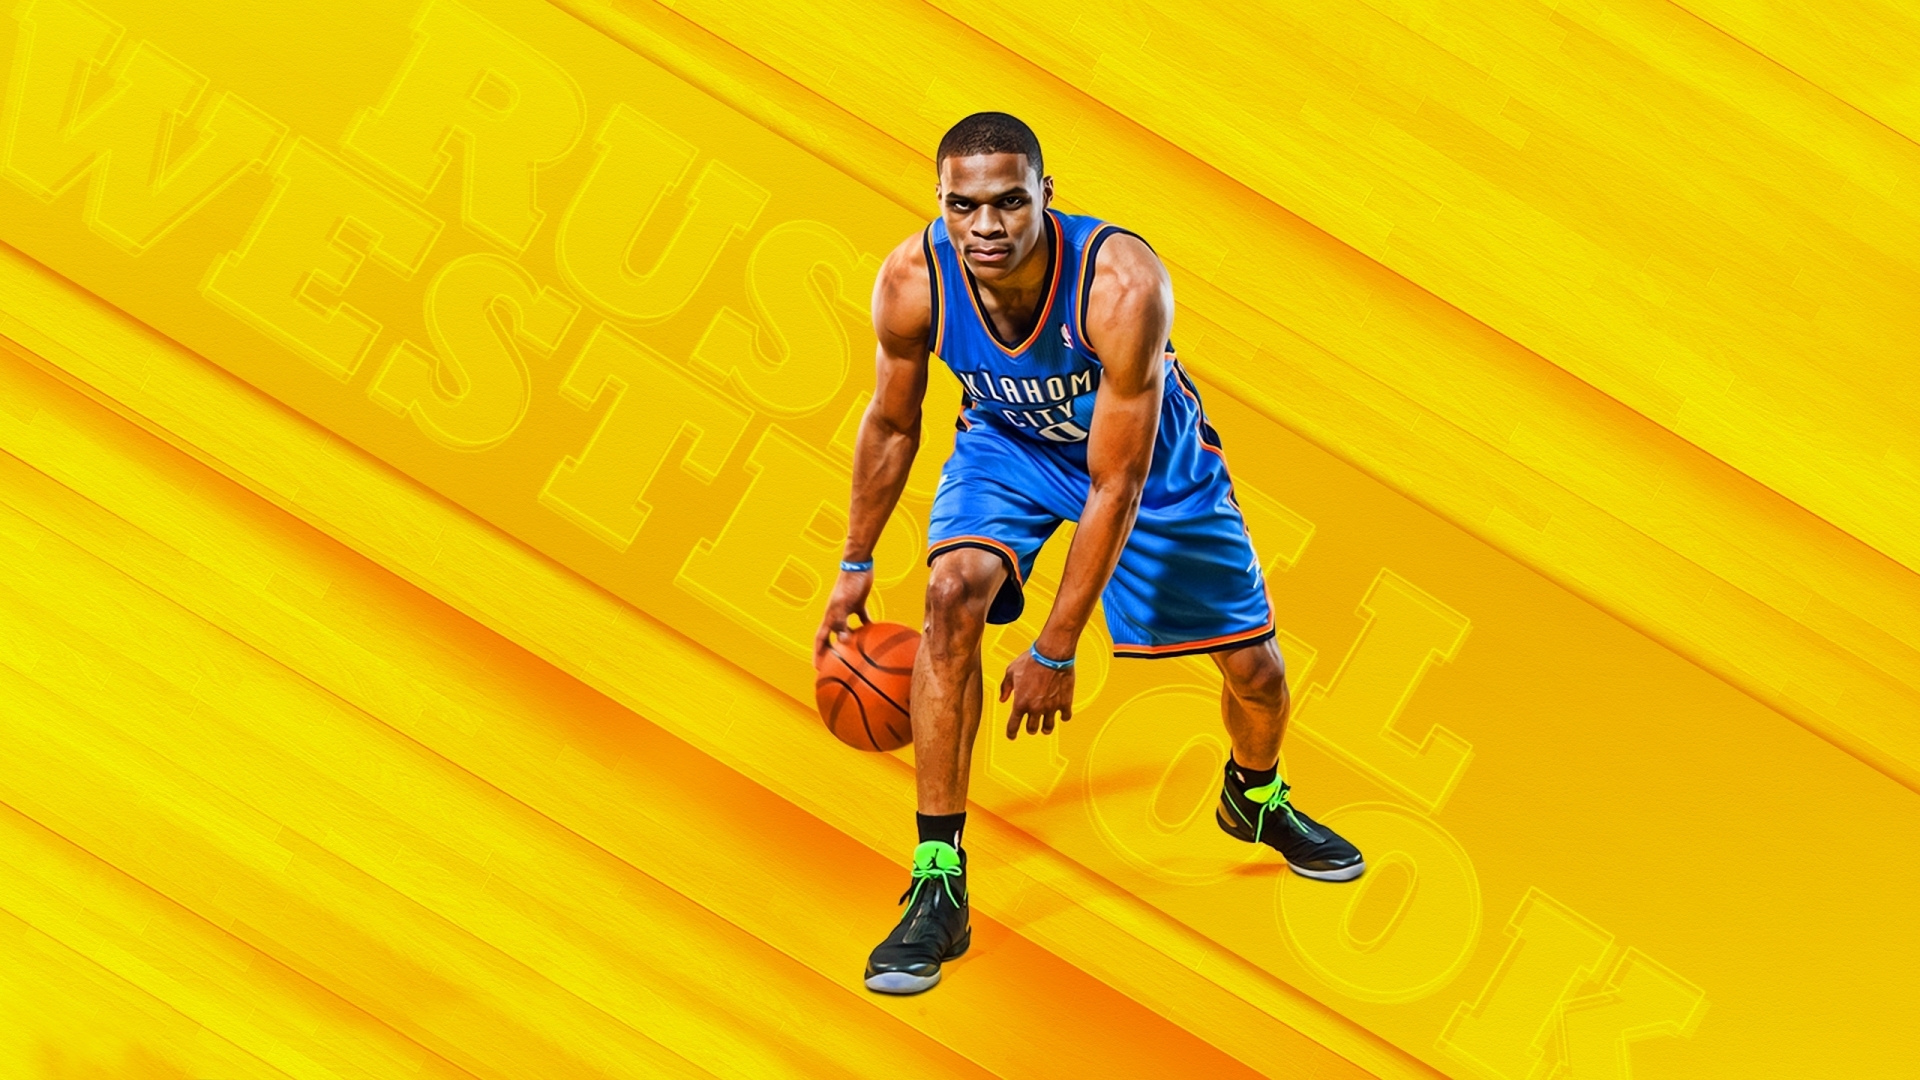 Russell Westbrook for 1920 x 1080 HDTV 1080p resolution